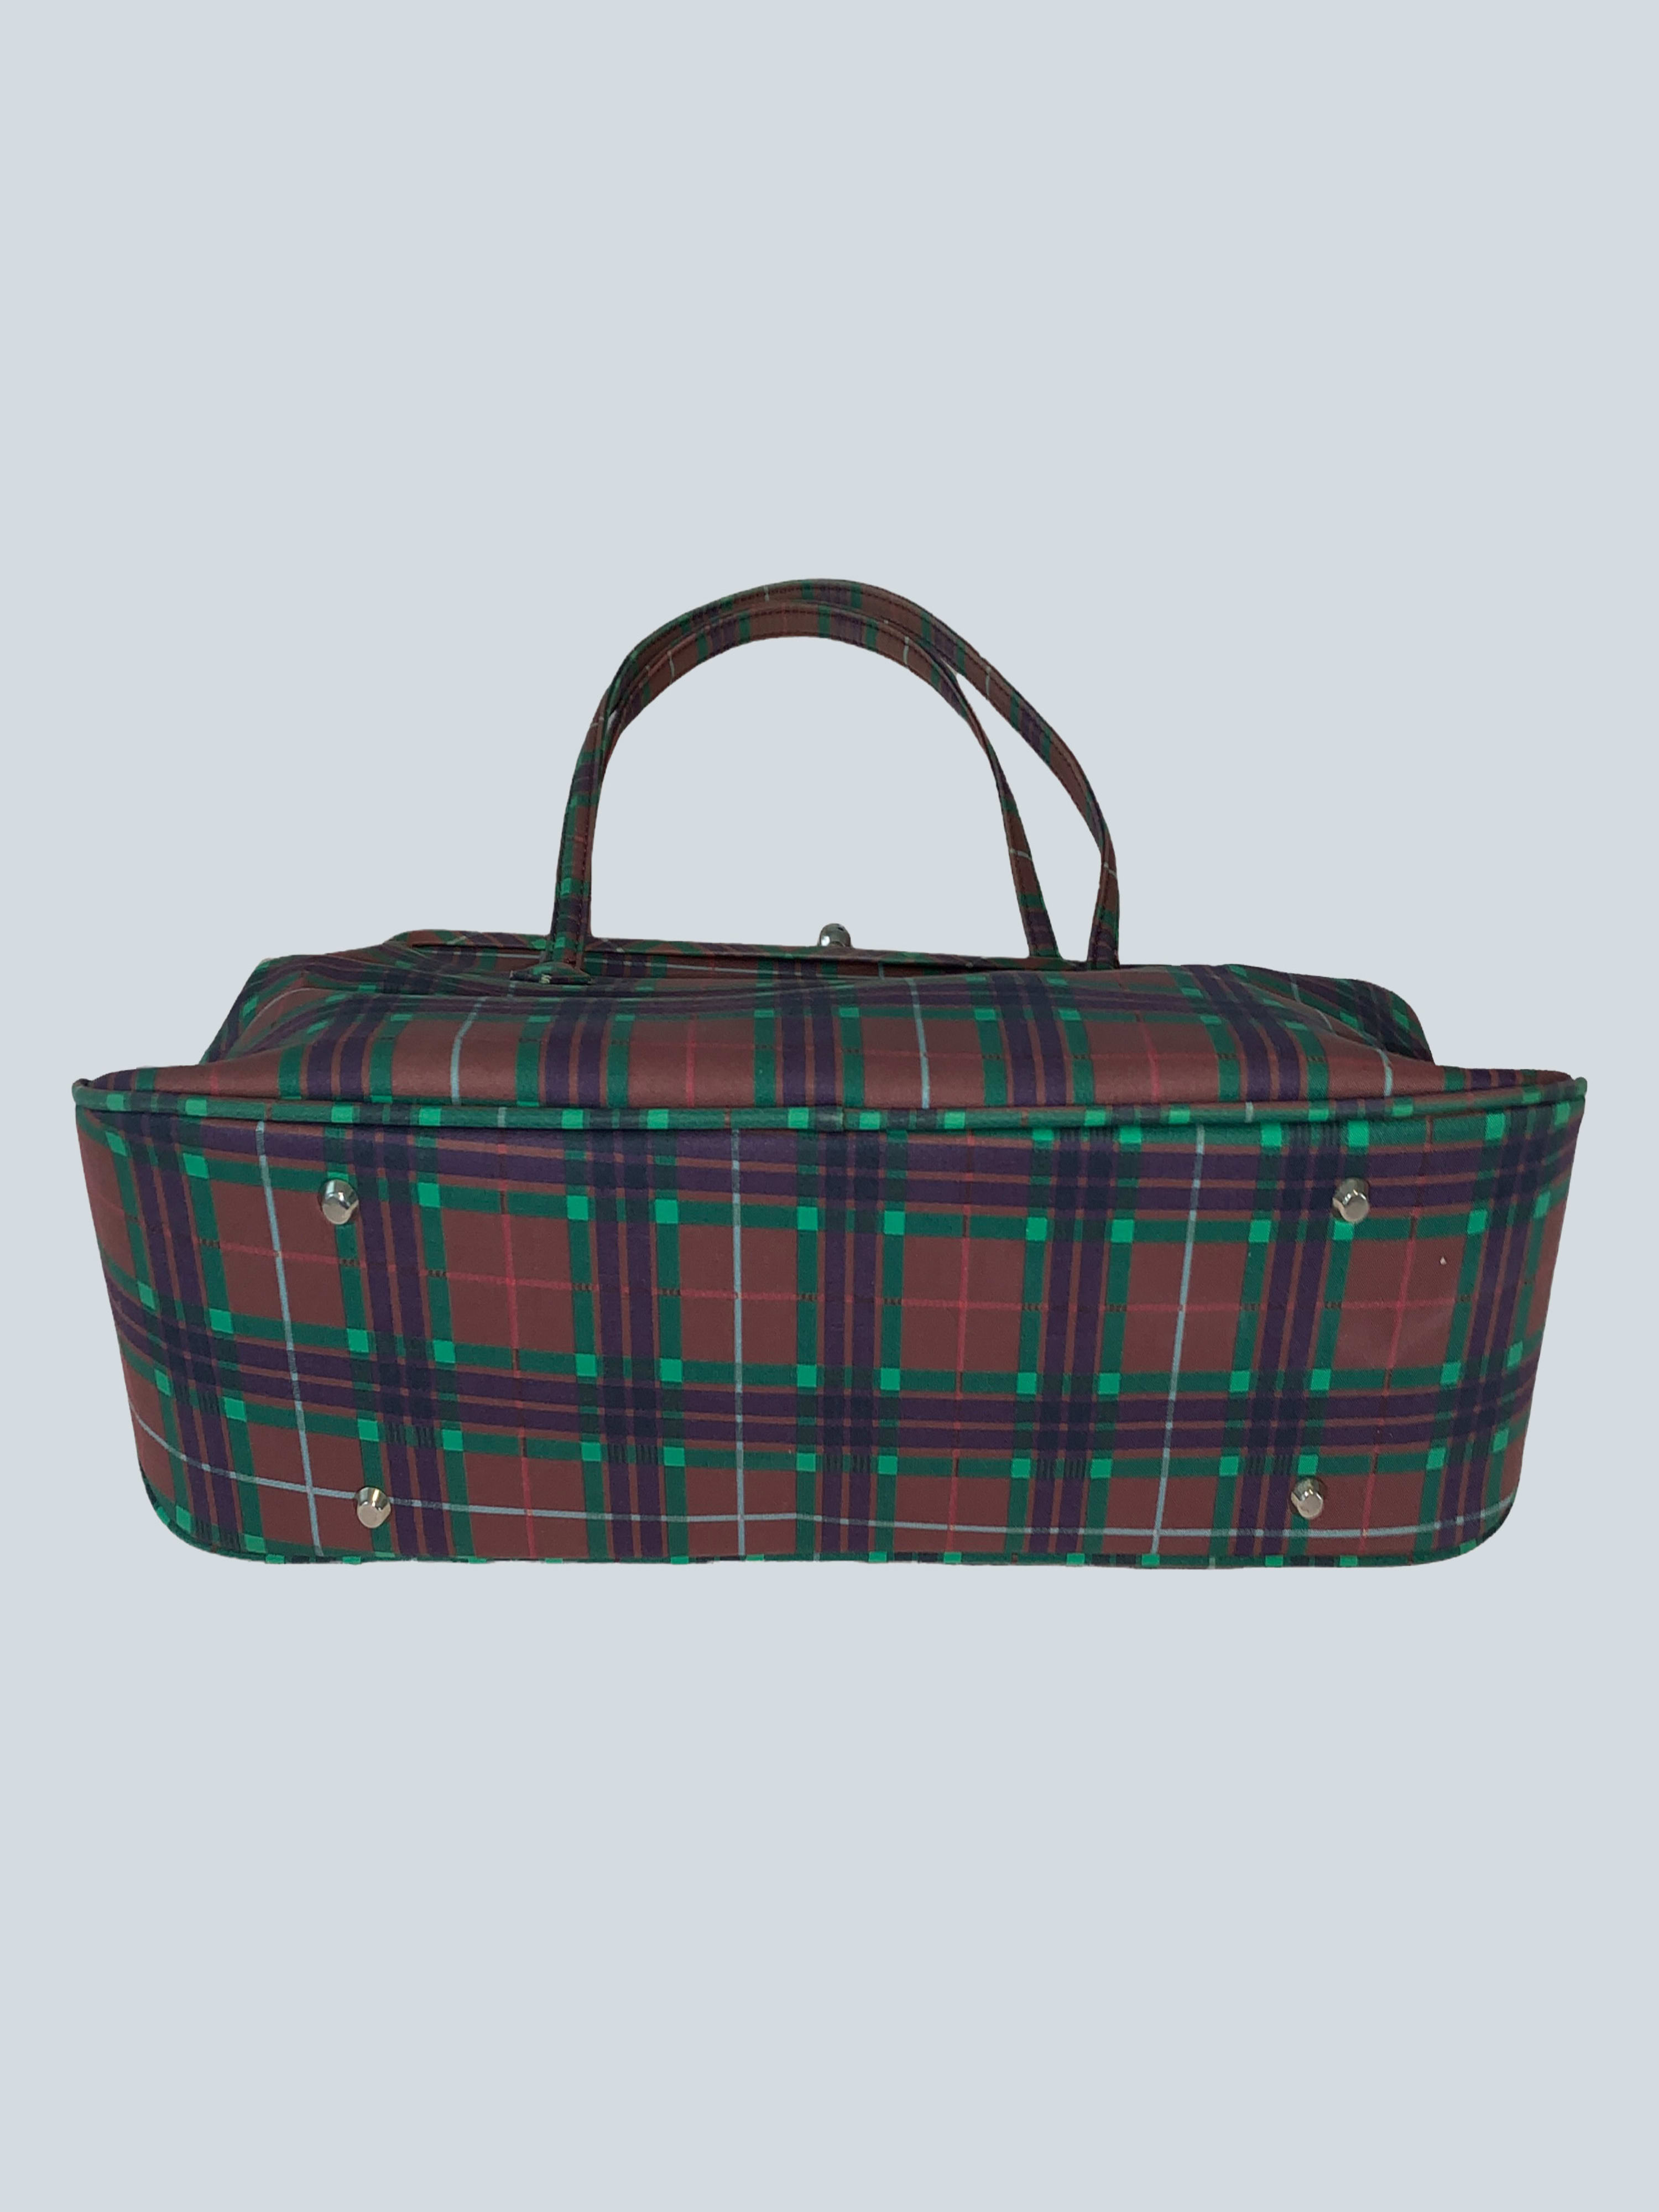 Buffalo Check Flannel Travel Bag With Red And Black Plaid Design Large  Capacity Outdoor Red Duffel Bag For Xmas Carry And Purse DOMIL106 377 From  Domildiscountshop, $15.26 | DHgate.Com